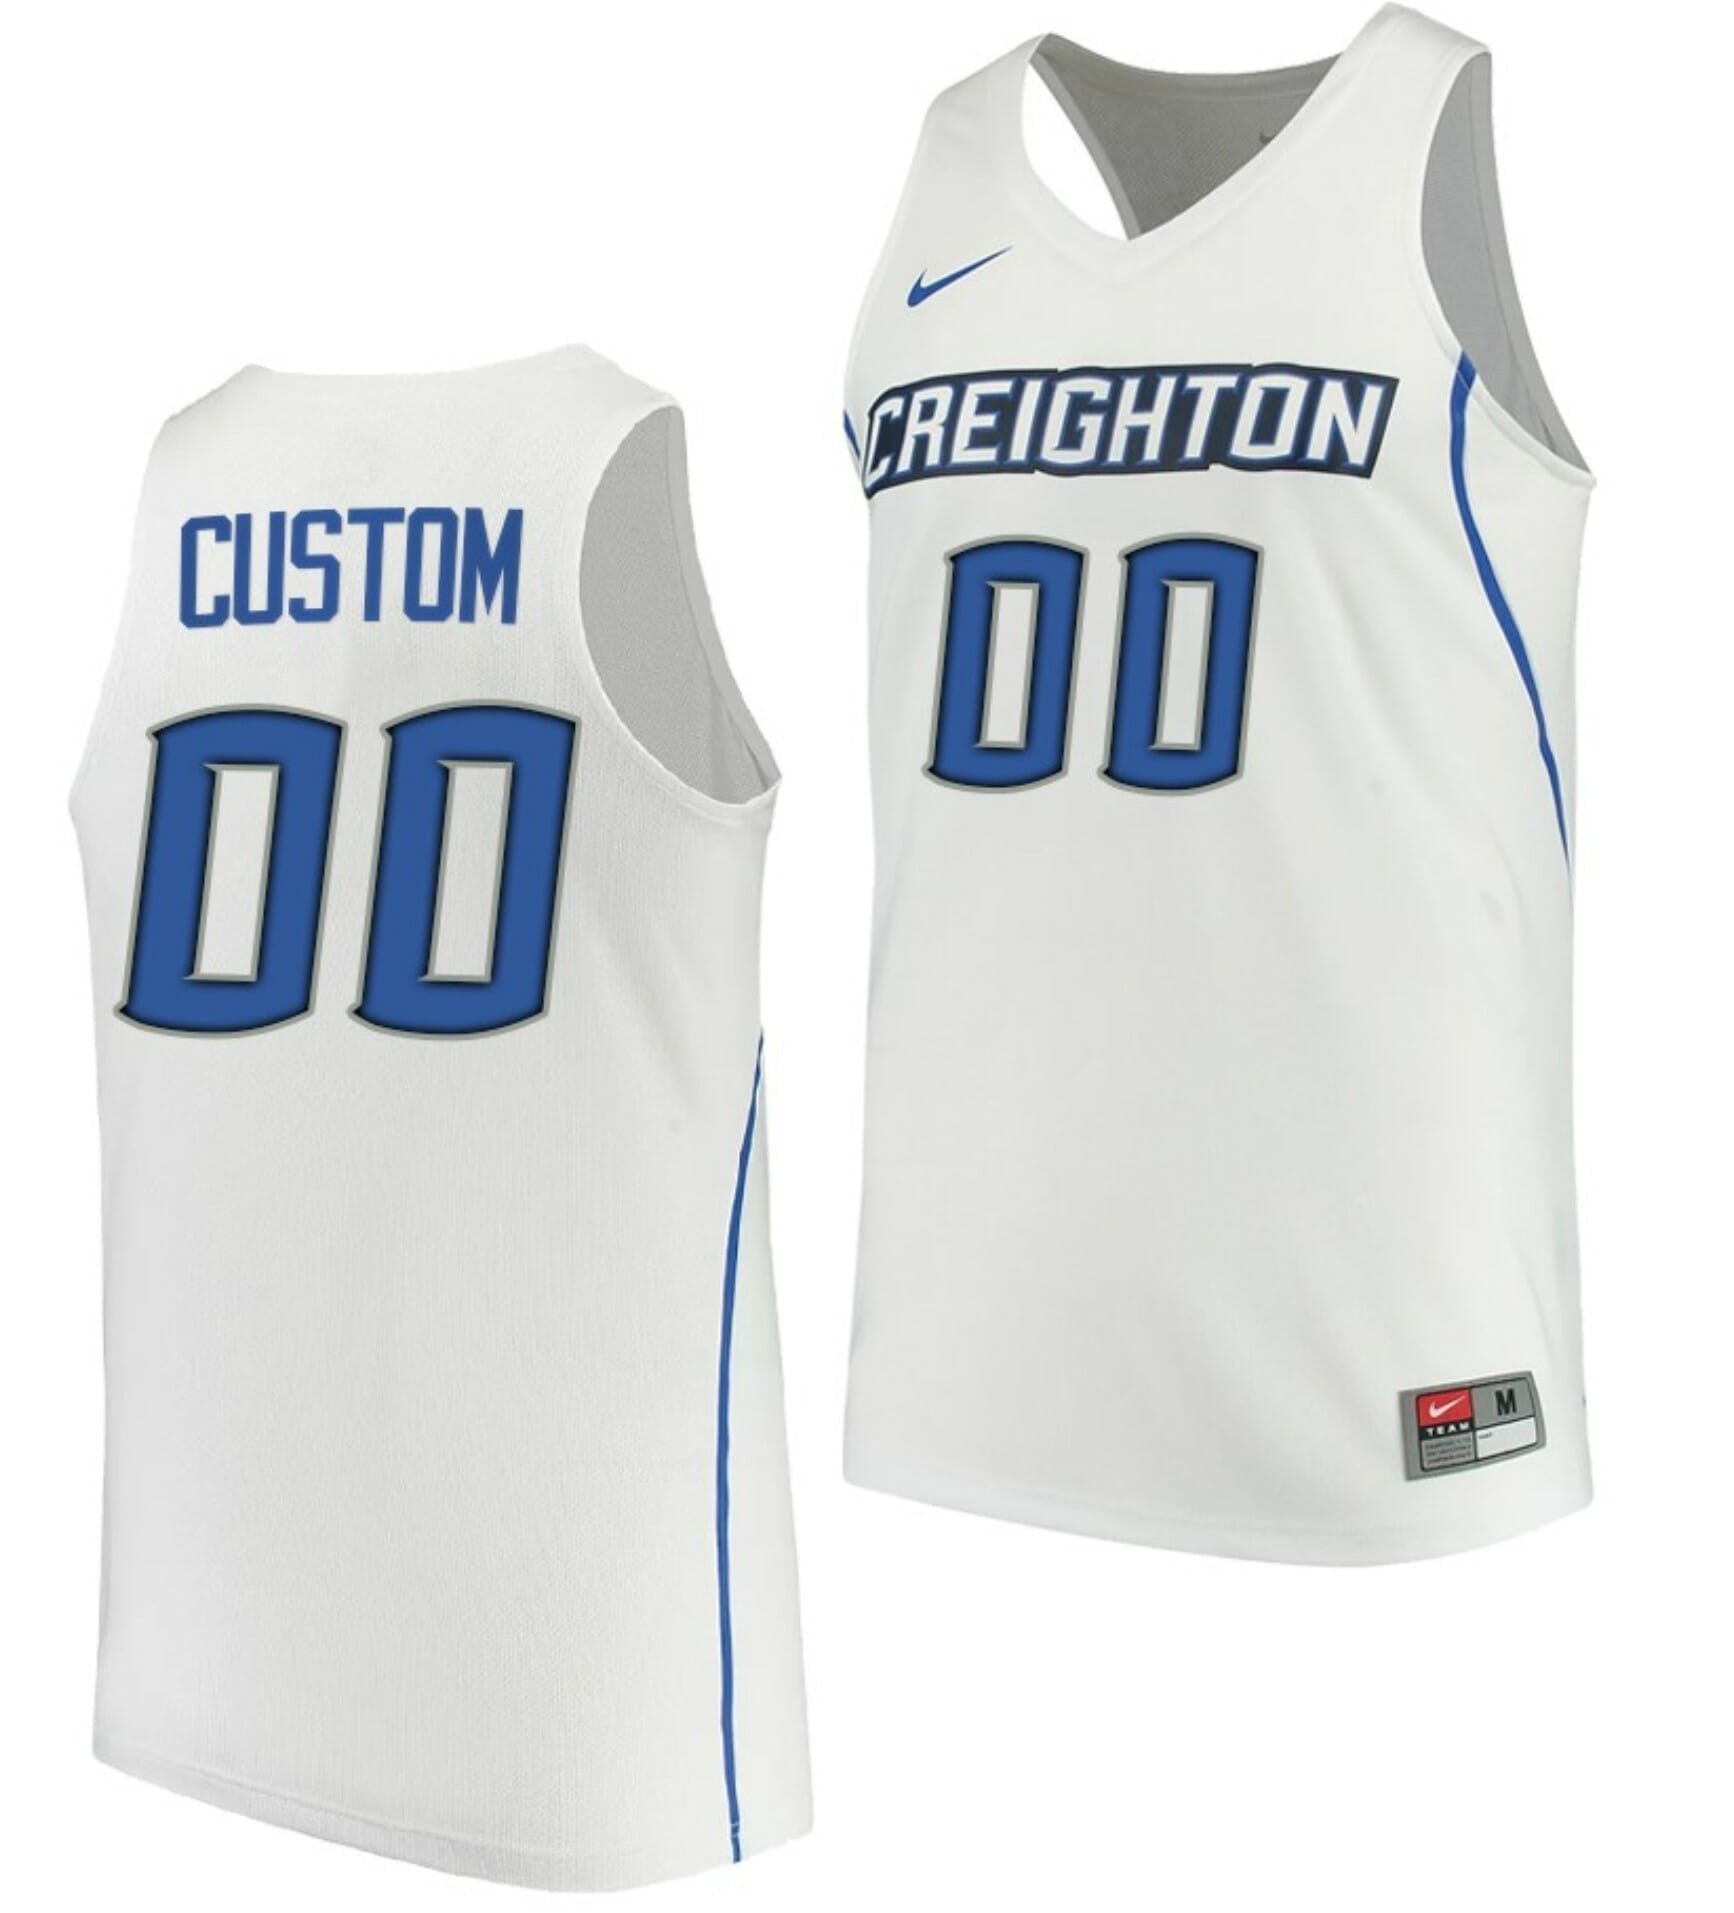 Custom College Basketball Jerseys Creighton Bluejays Jersey Name and Number Retro White